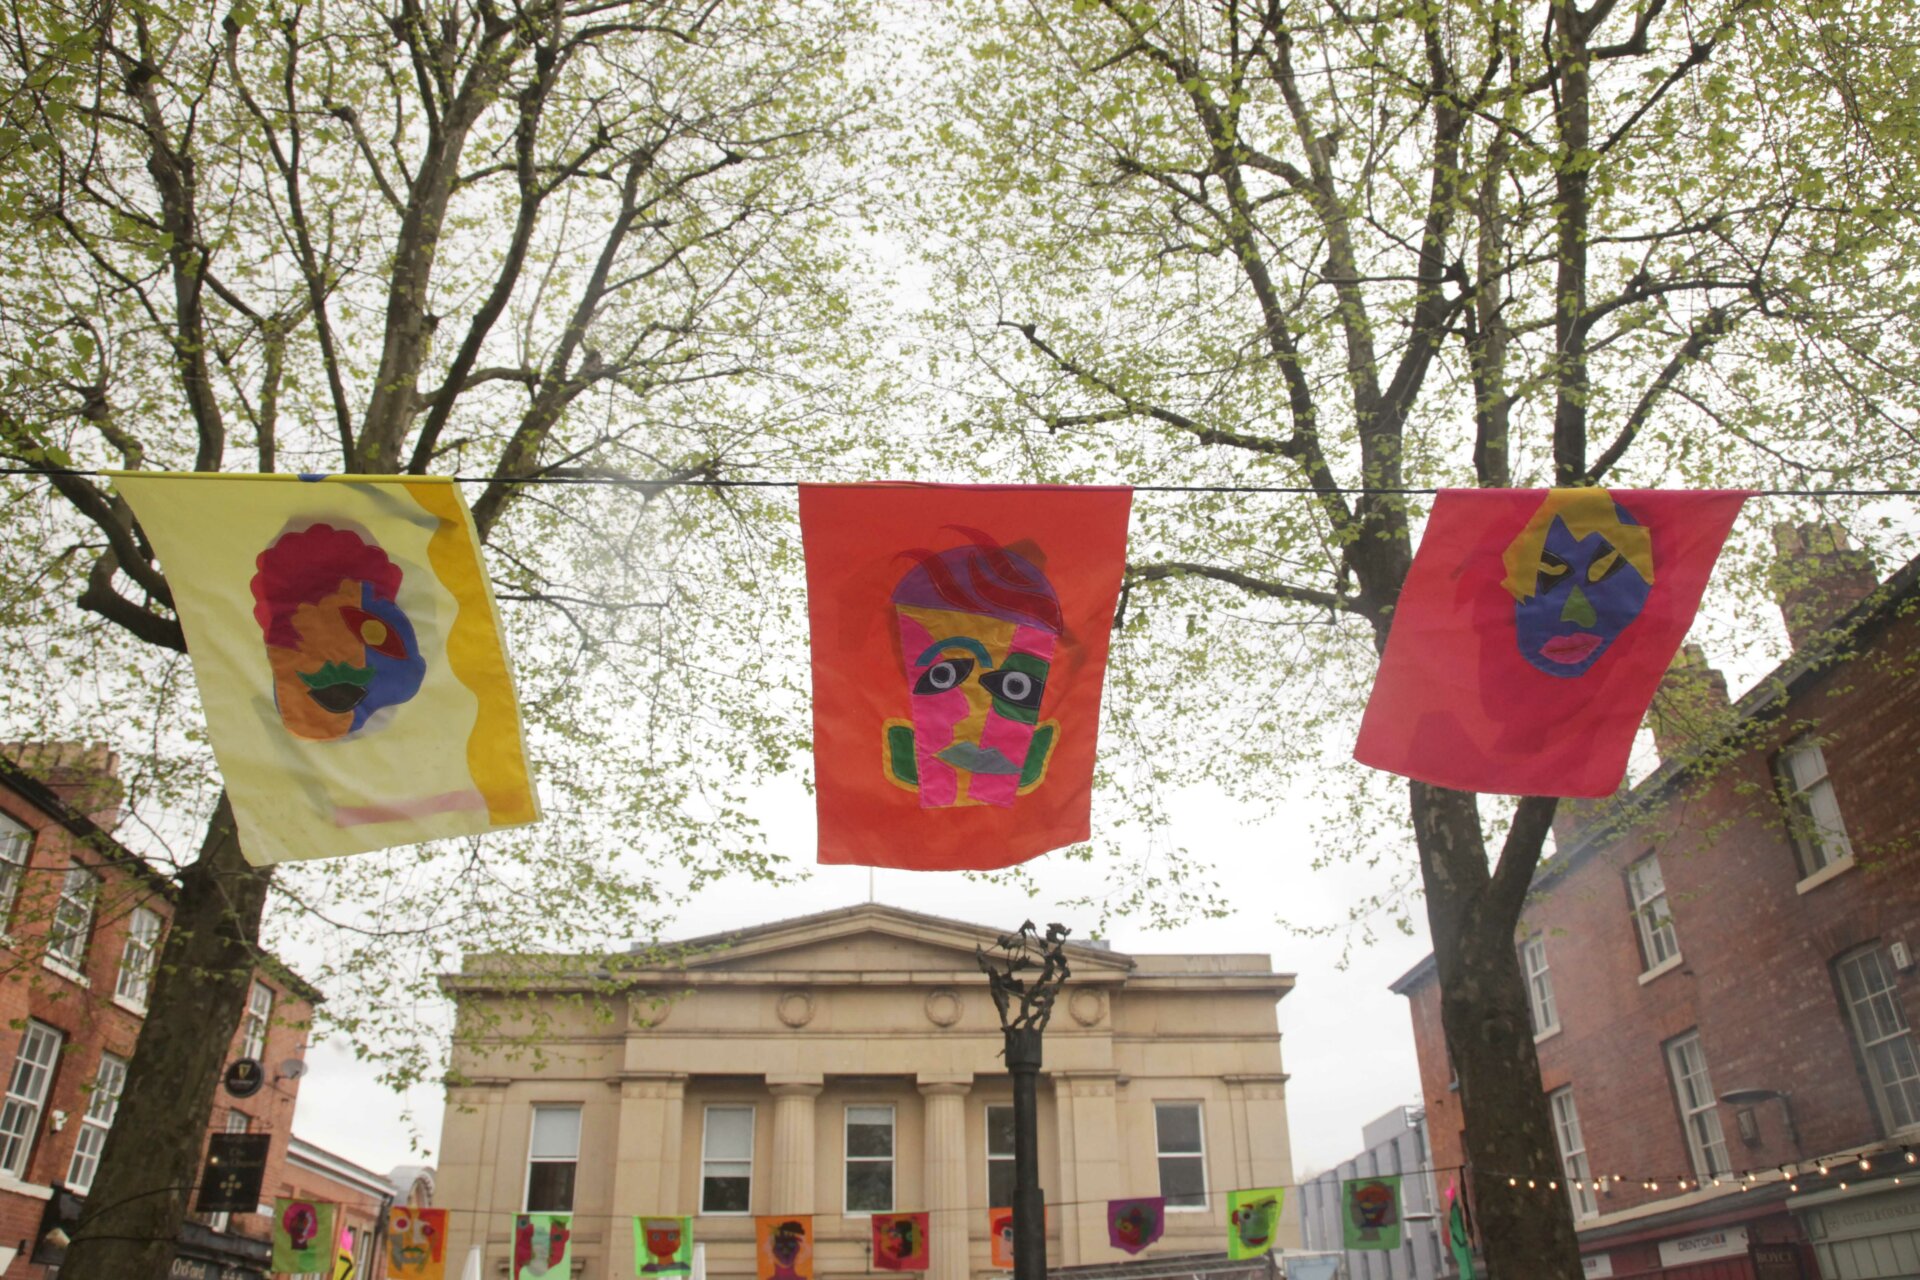 Arty flags flying at Bexley Square during Sounds from the Other City Festival